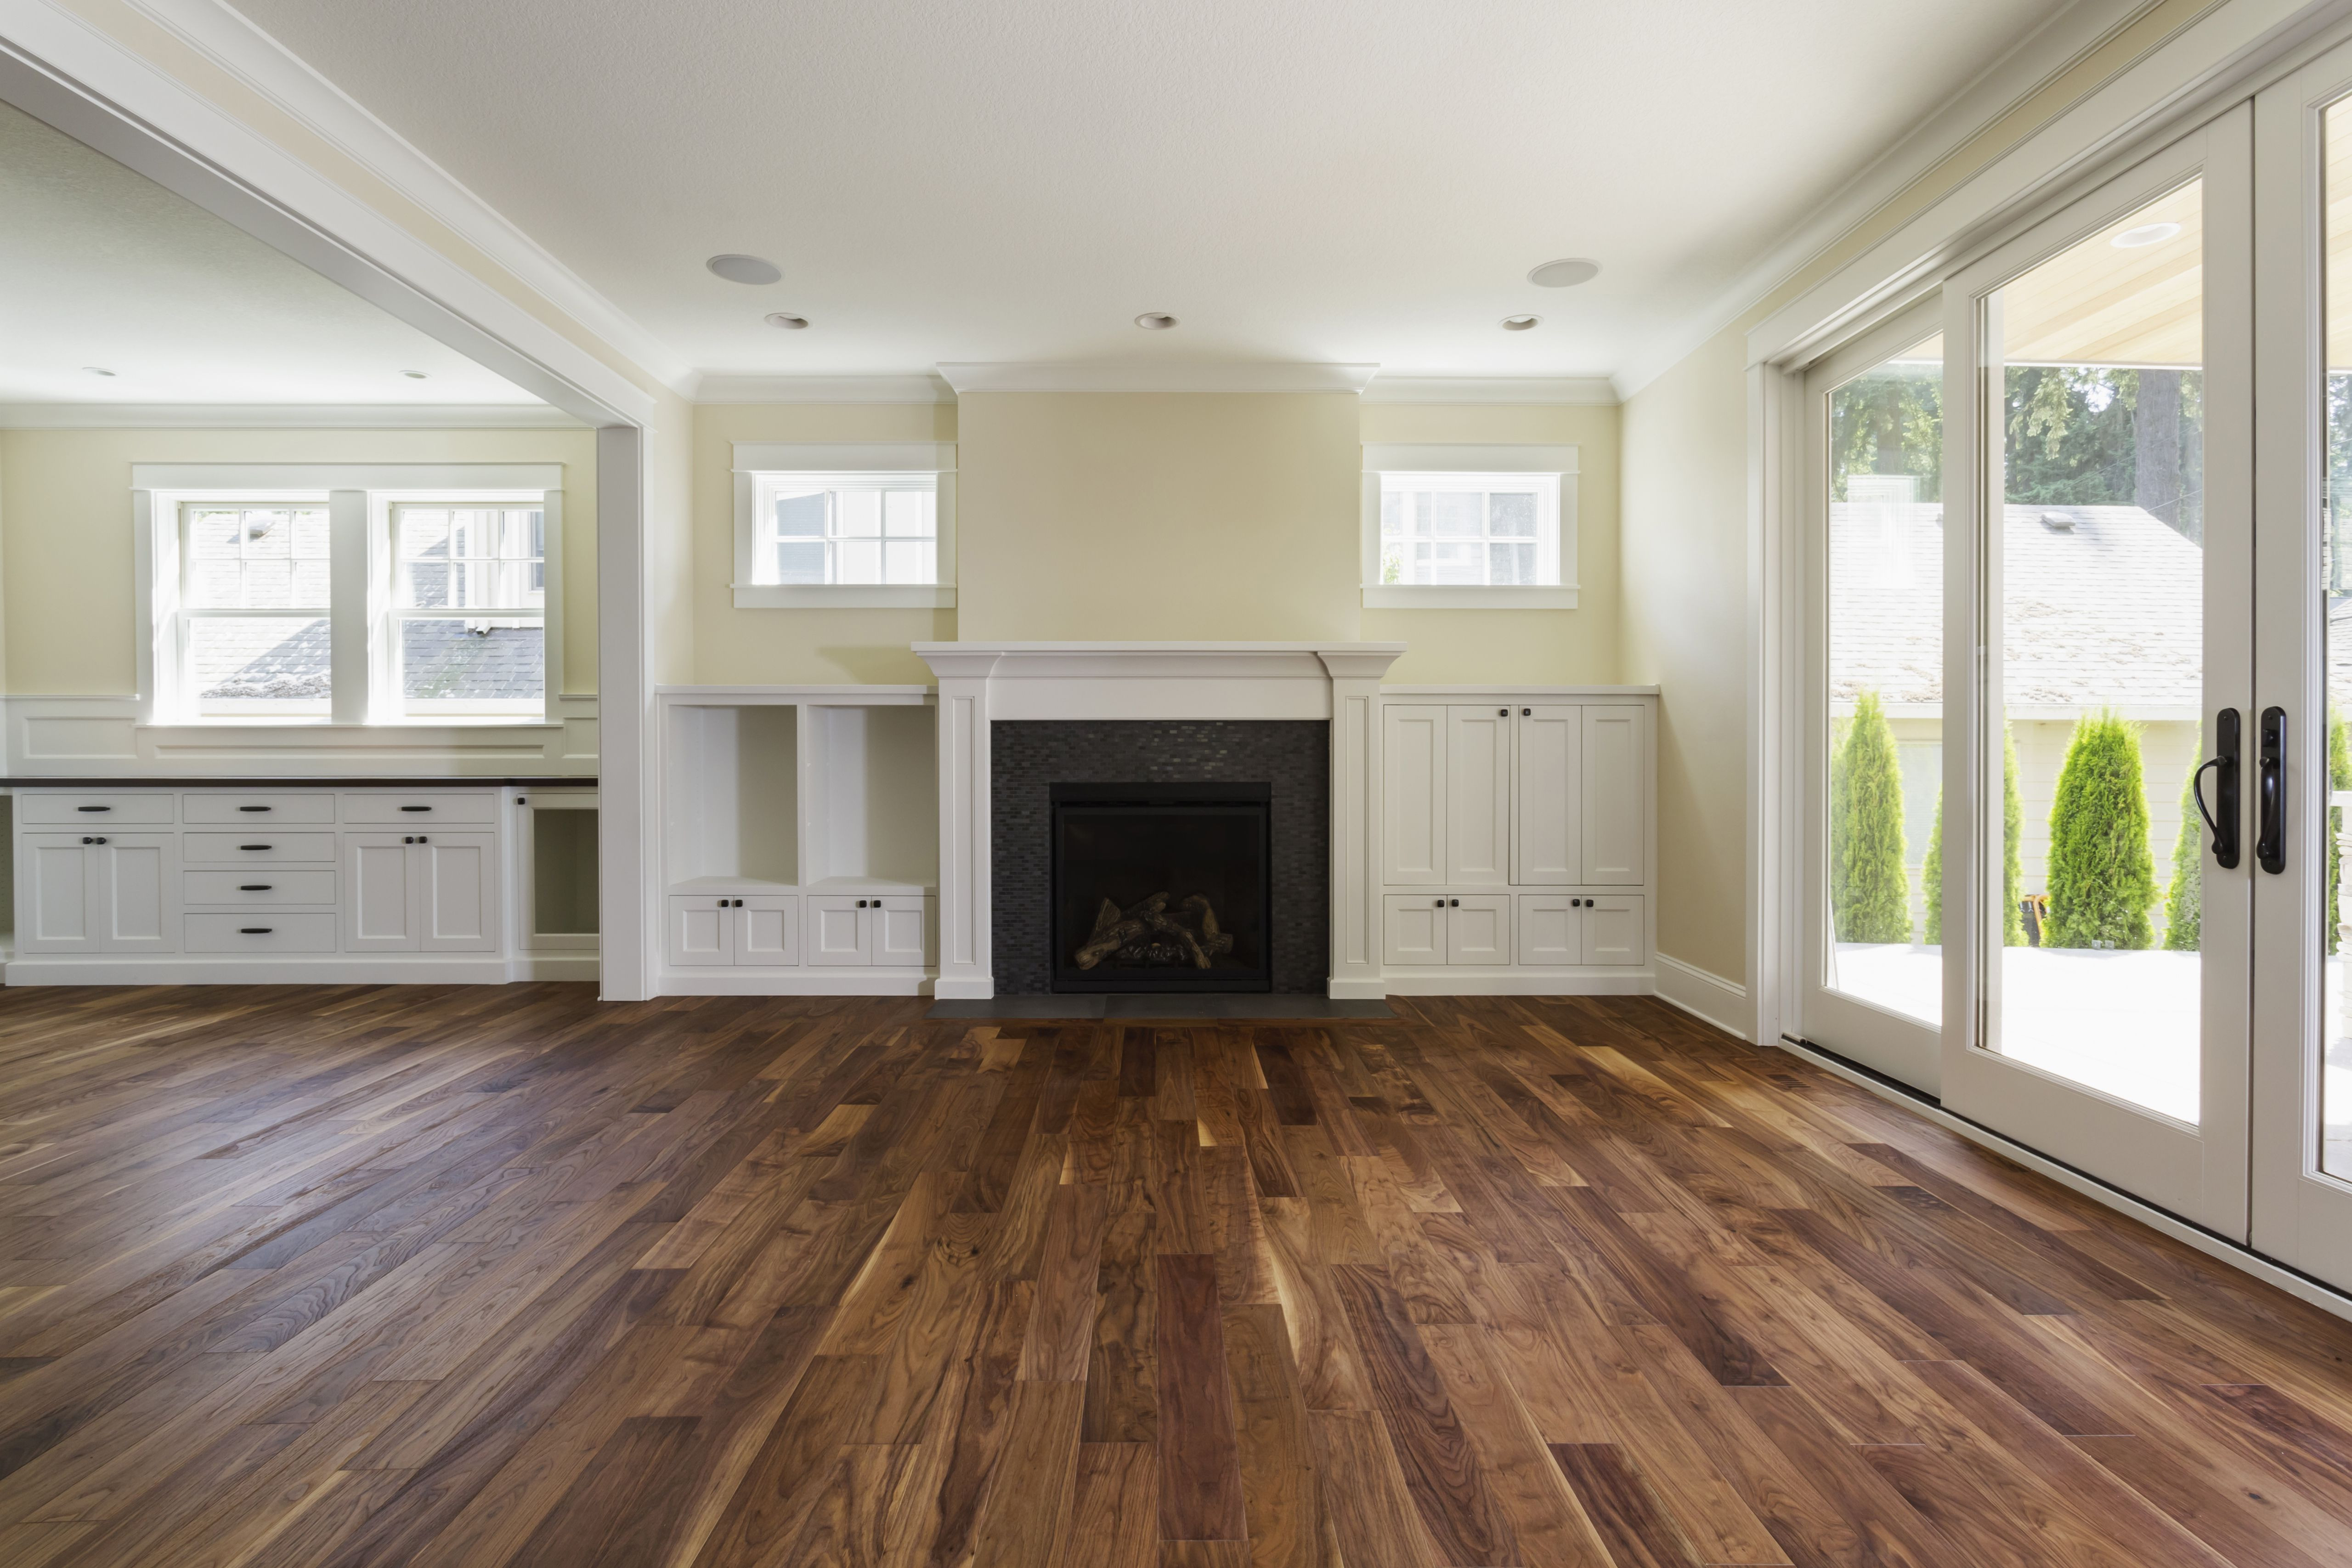 labor cost to install hardwood floors of the pros and cons of prefinished hardwood flooring inside fireplace and built in shelves in living room 482143011 57bef8e33df78cc16e035397